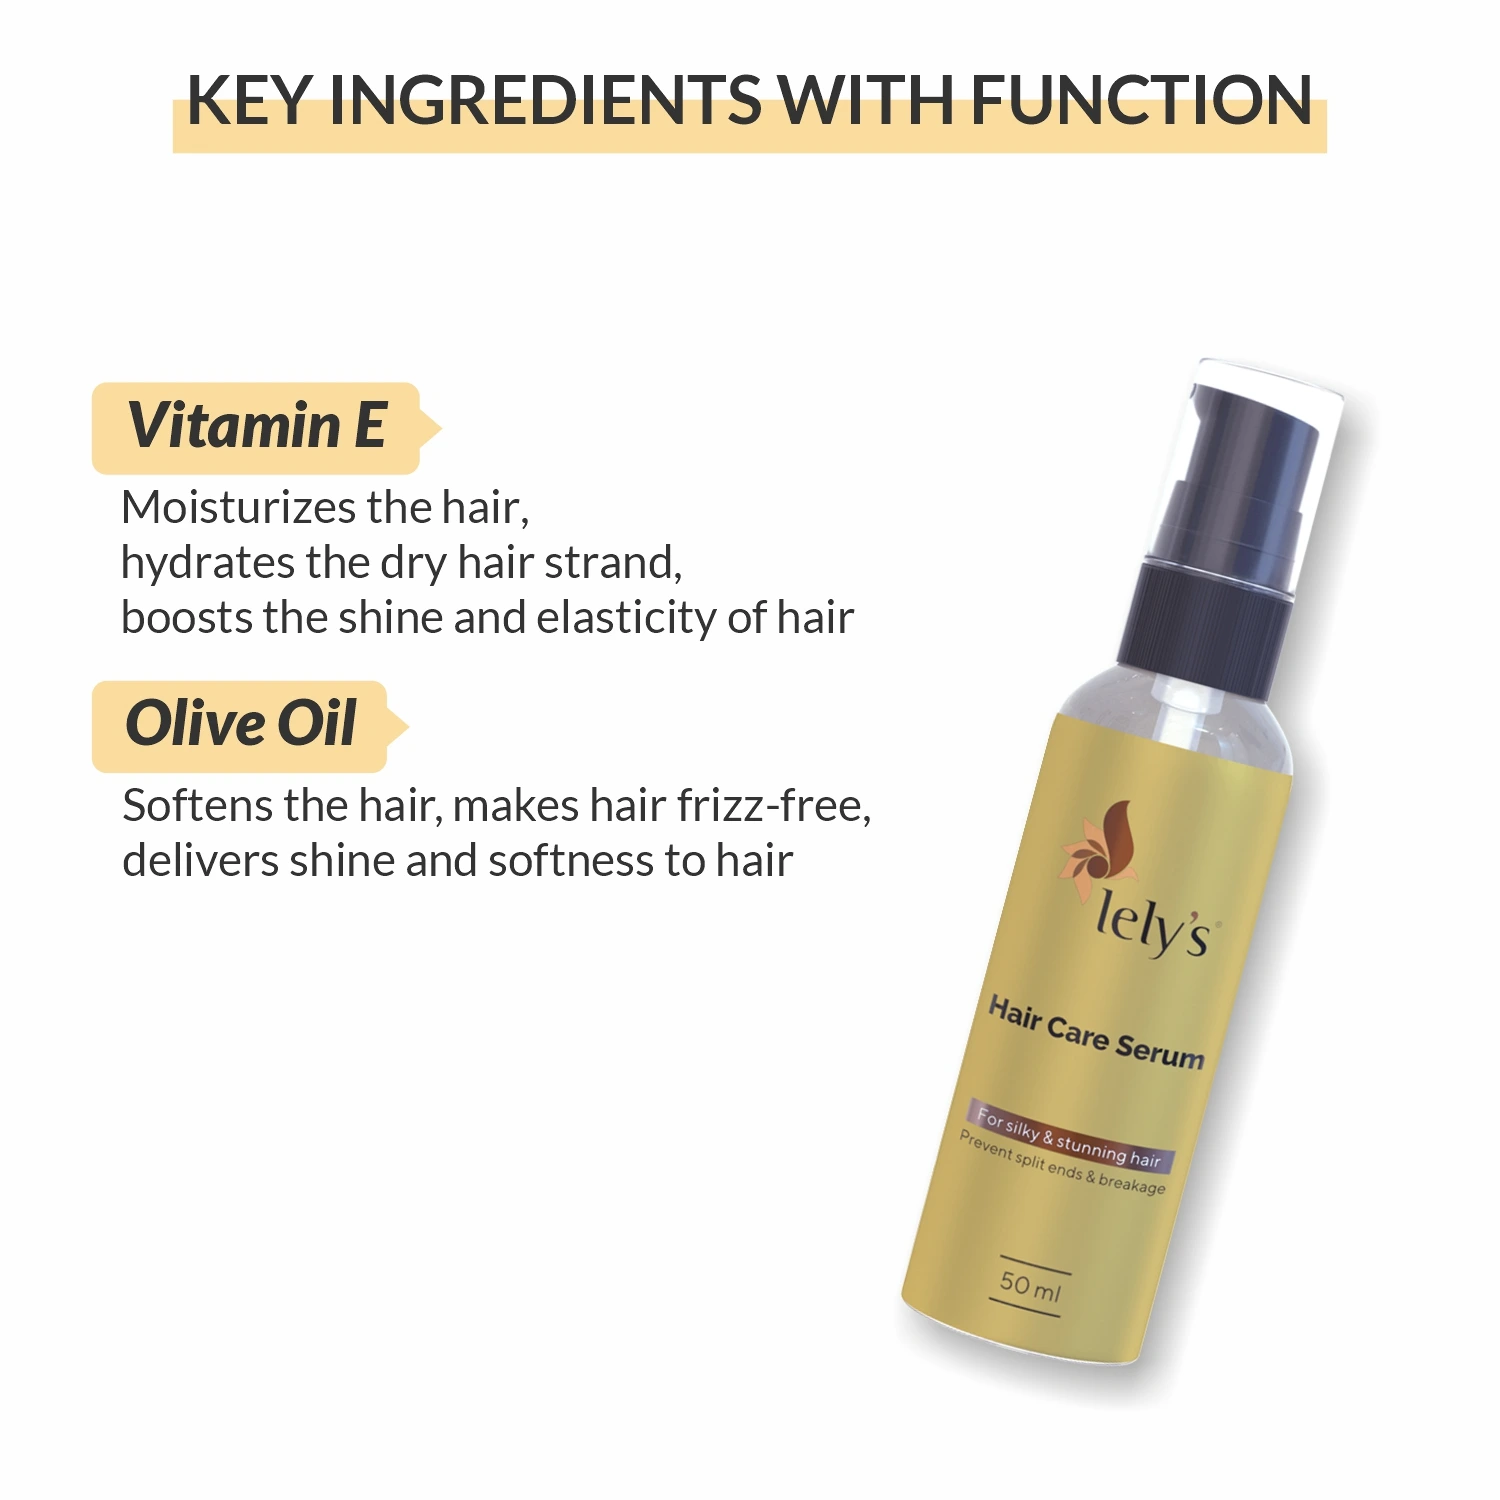 Hair Care Serum strengthen hair's structure